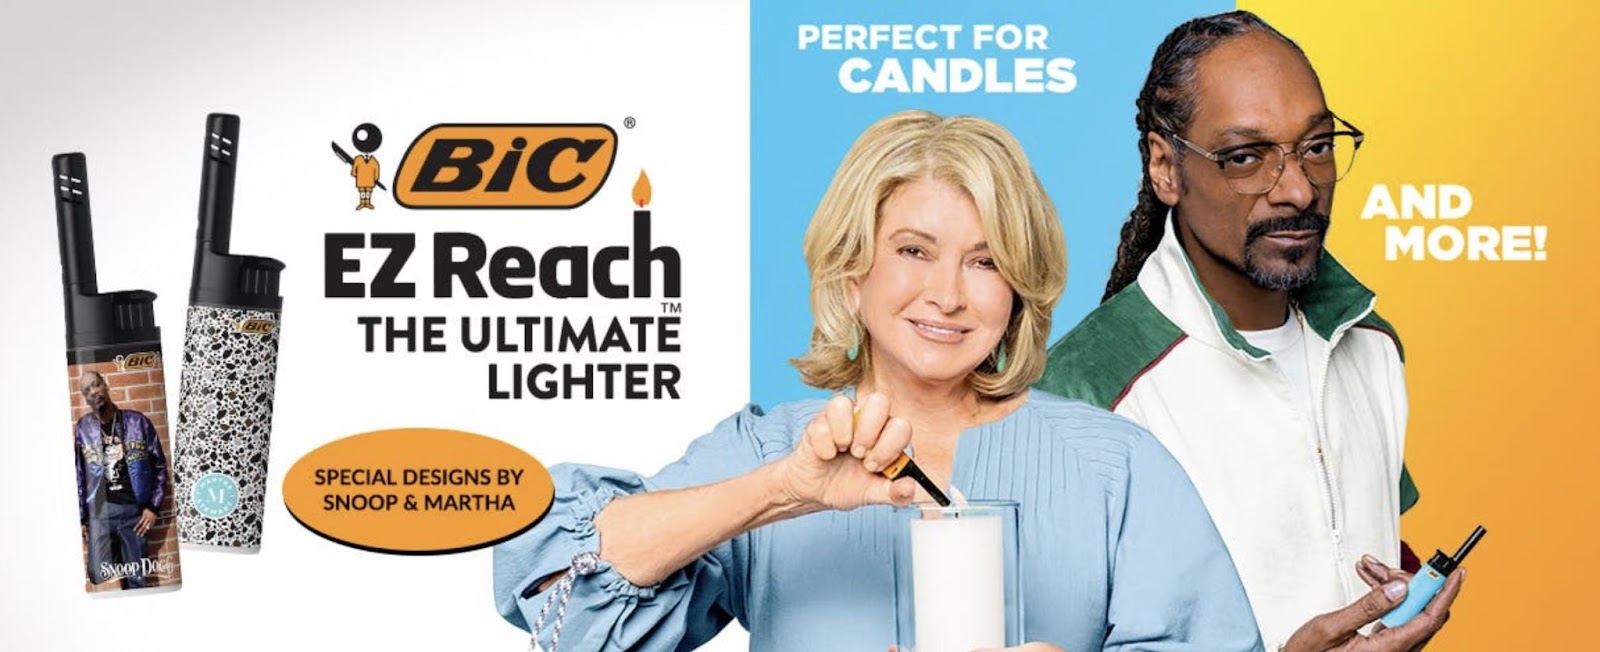 Bic's ad featuring Martha Stewart and Snoop Dogg with "Perfect for candles and more" copy